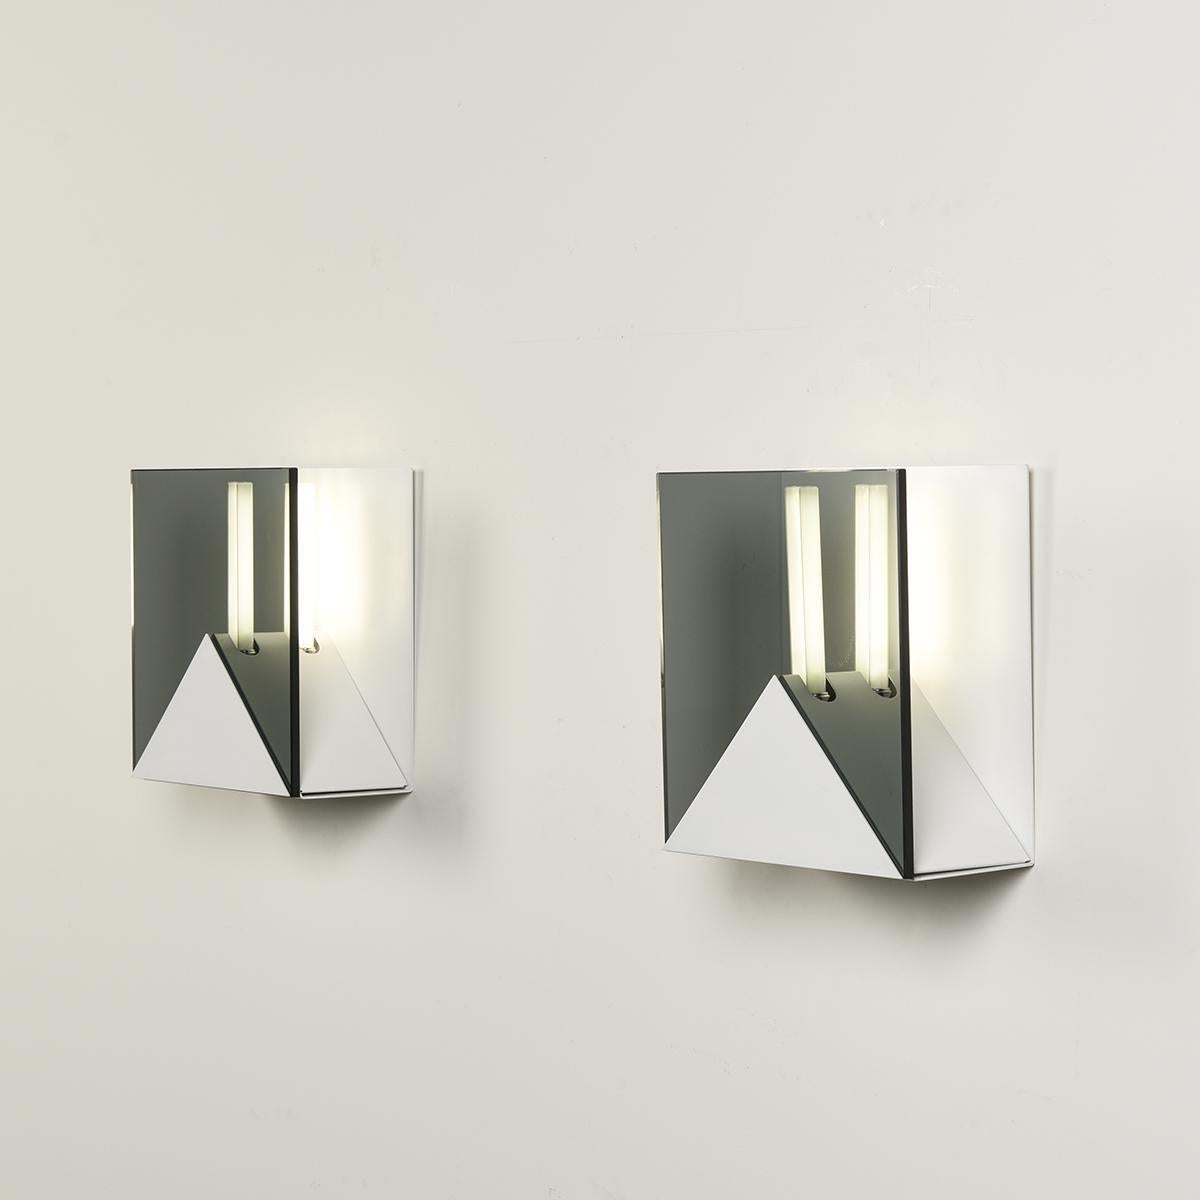 Pair of Smoked glass wall lamps 20620, Verre Lumière ed., circa 1975

